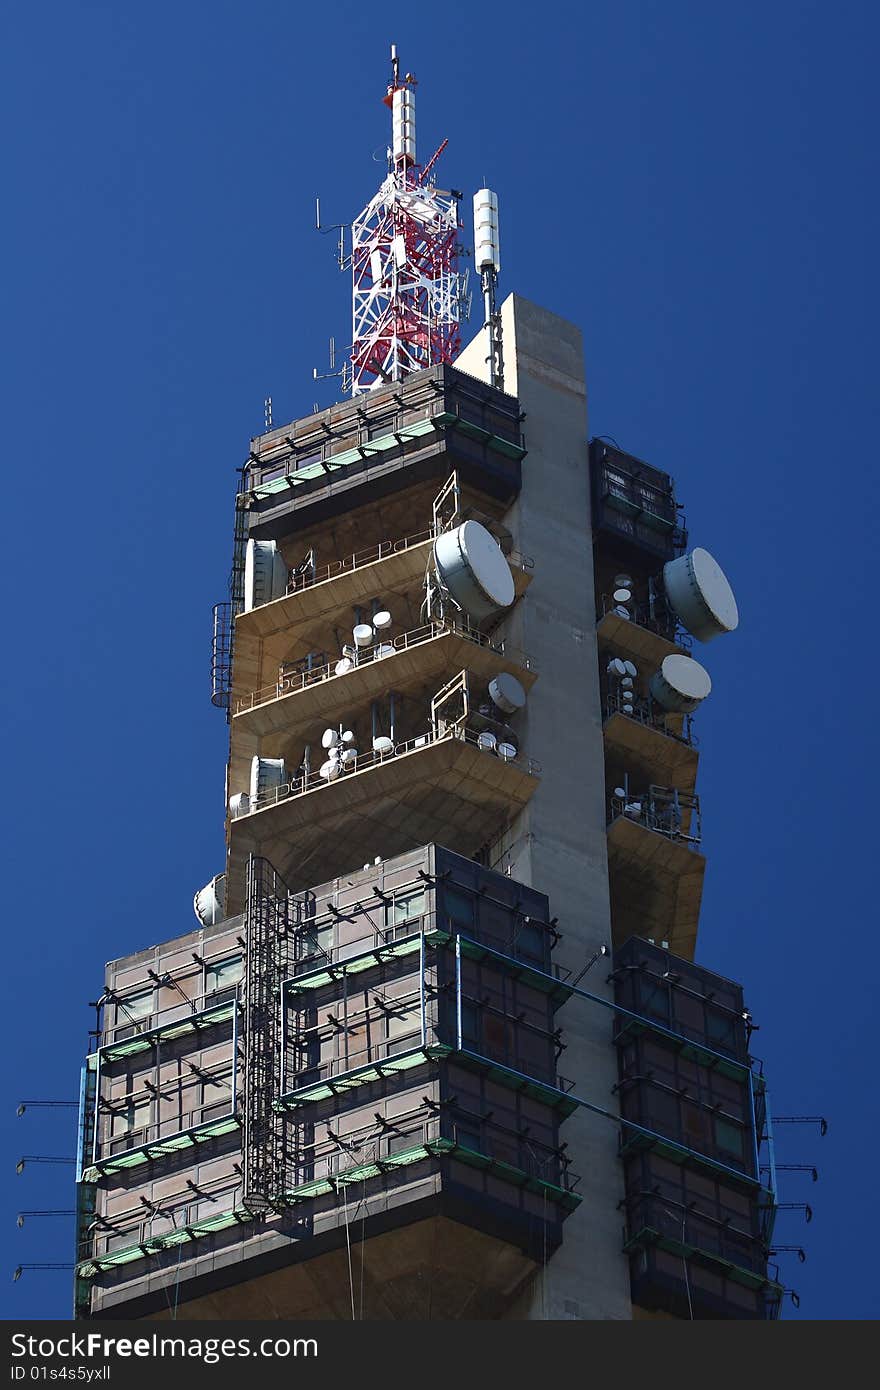 Large microwave tower build from concrete against a blue sky. Large microwave tower build from concrete against a blue sky